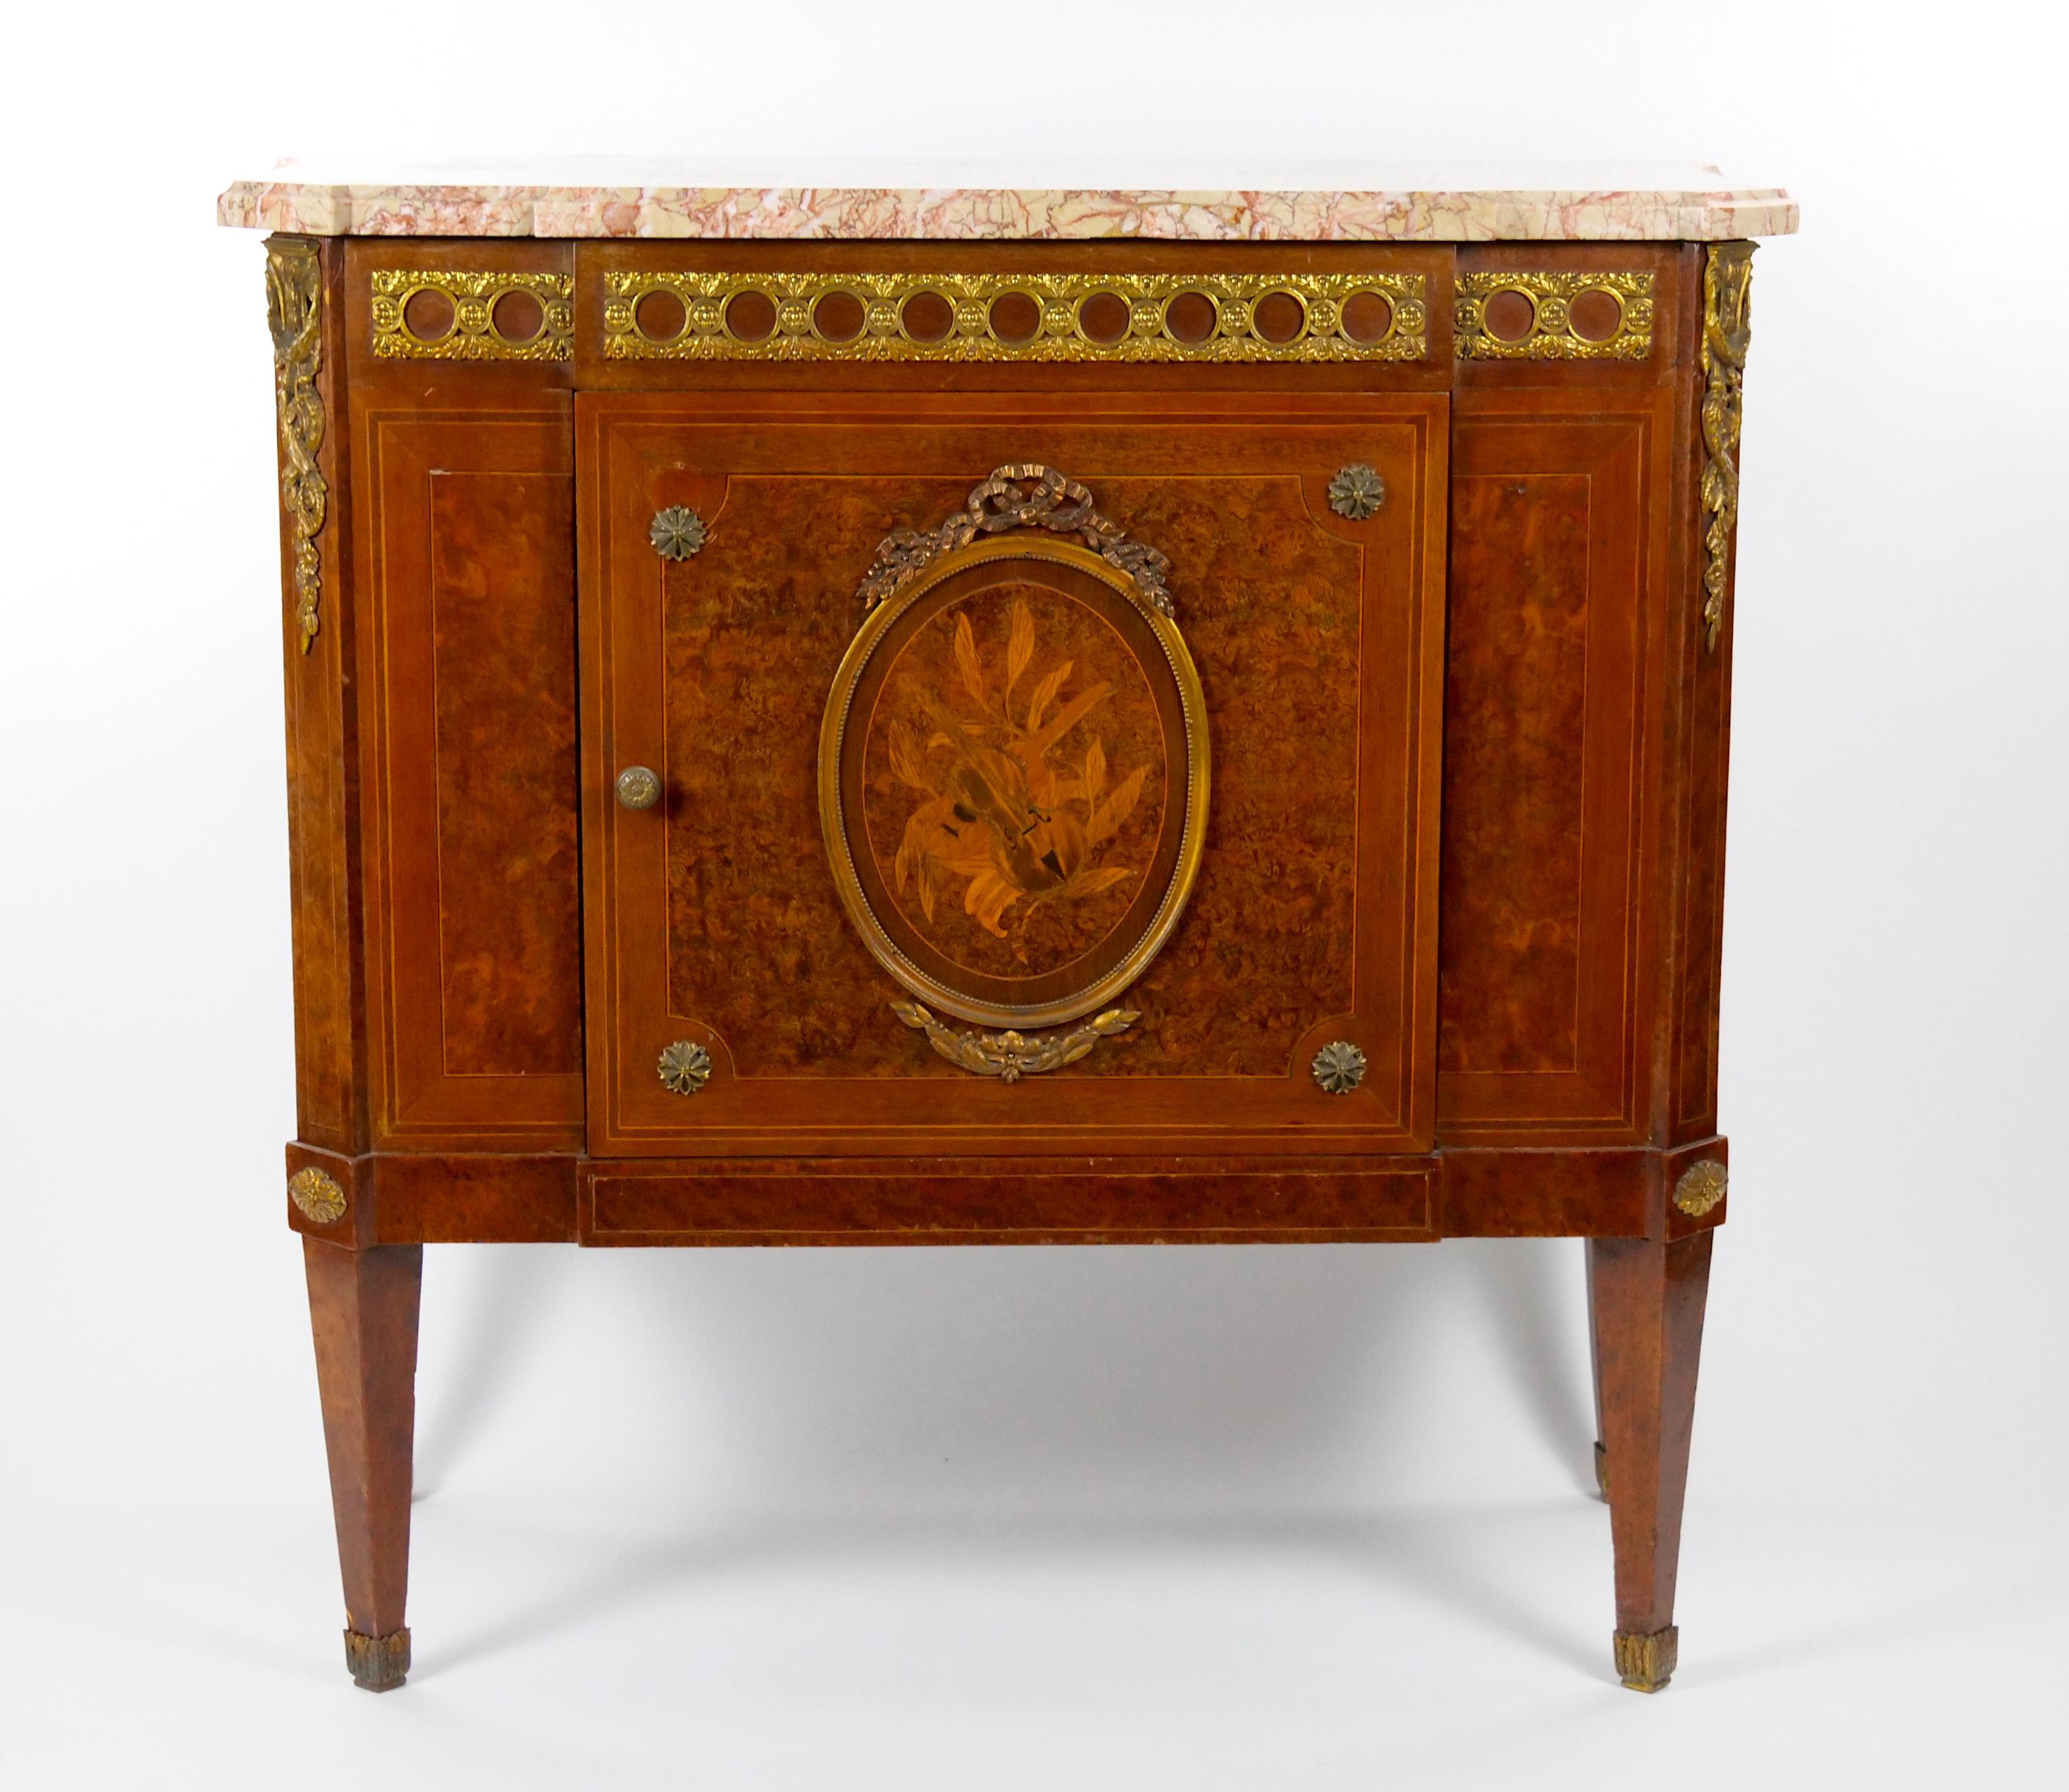 
Step into a realm of unrivaled grandeur with this extraordinary 19th century French petite commode sideboard cabinet, masterfully crafted in the esteemed Louis XVI style. Every detail of this opulent piece speaks volumes about the impeccable